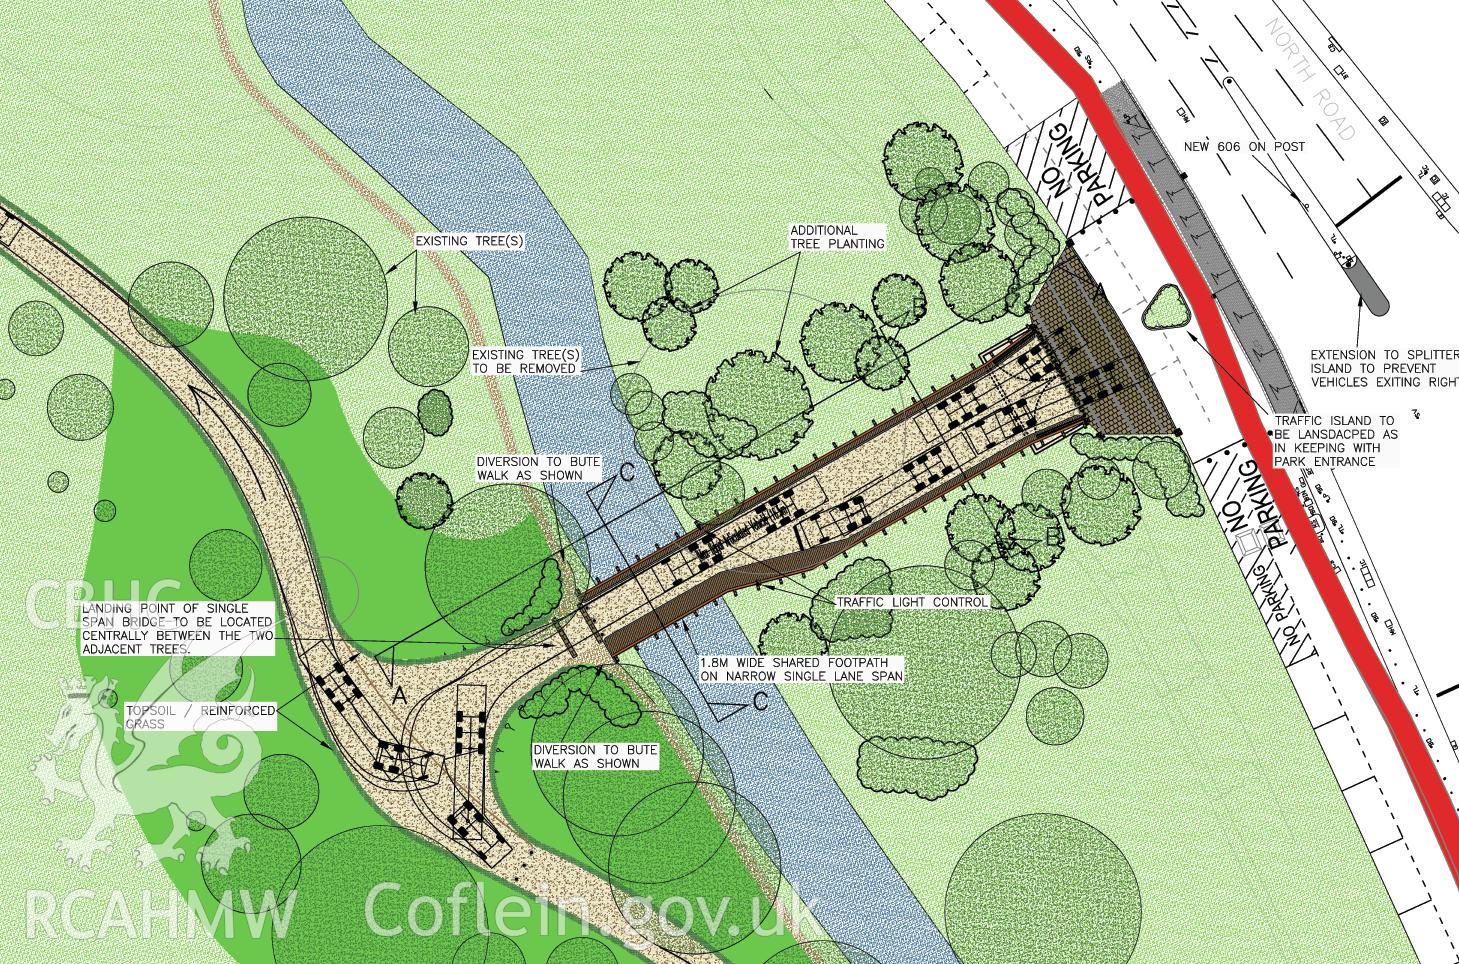 Digital plan showing proposed bridge at Bute Park and area of excavation (CAP Report 578) by K W Collins.